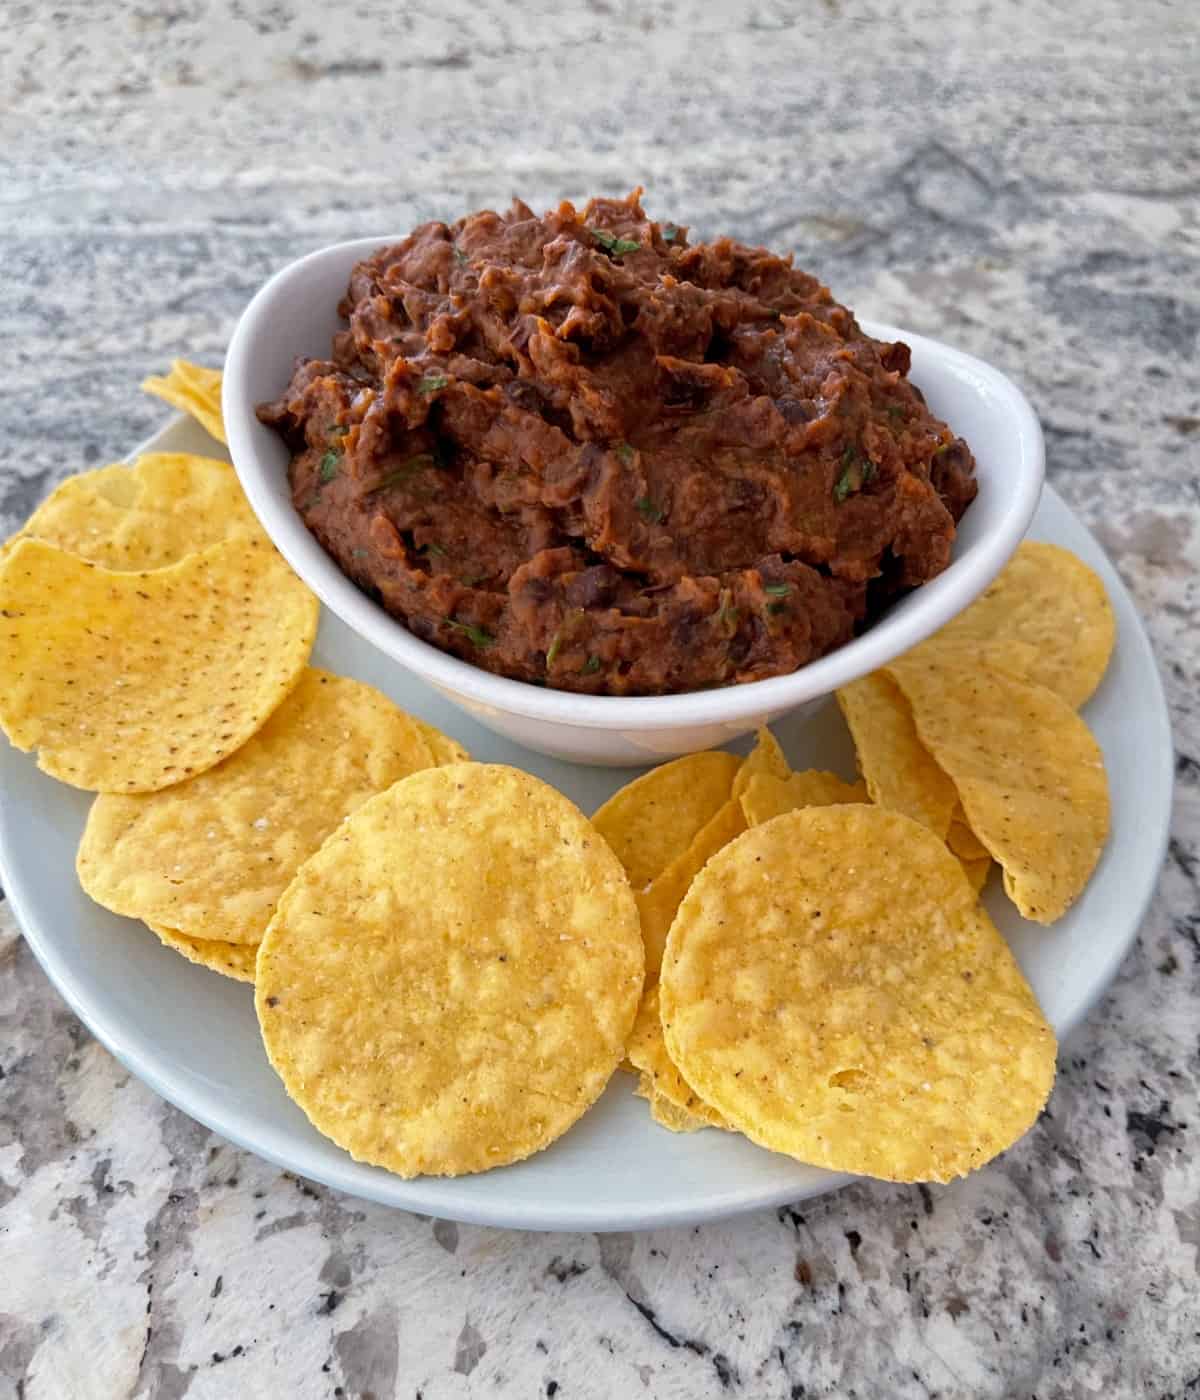 Warm refried black bean dip in white bowl with yellow corn tortilla chips.